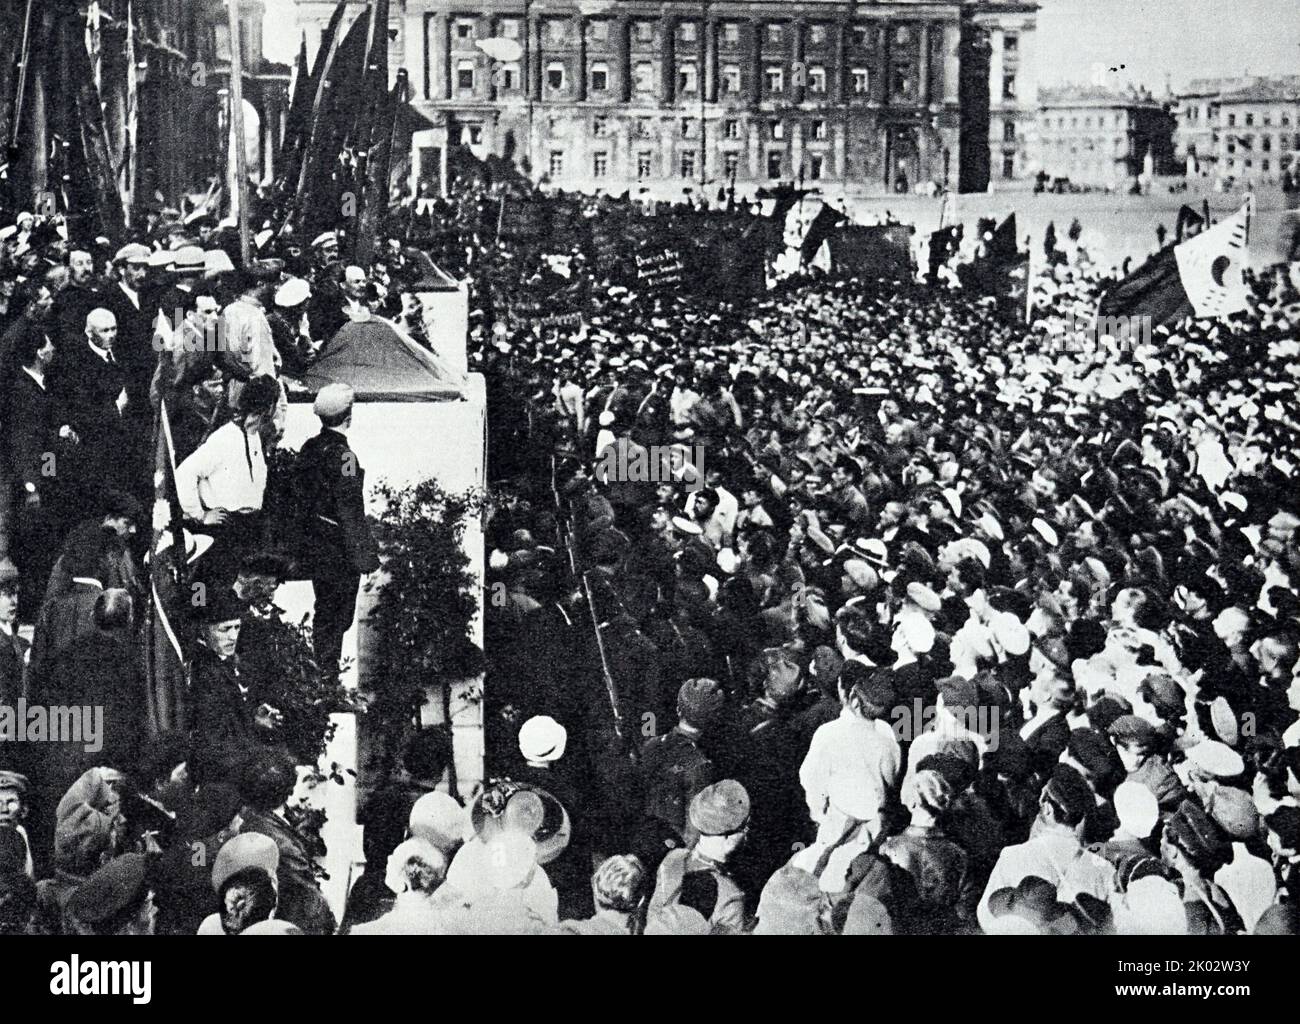 Vladimir Lenin delivers a speech at a meeting dedicated to the laying of the monument to K. Liebknecht and R. Luxemburg on the Palace Square. 1920, July 19. Petrograd. Original. Photographer - Bulla V. K. Stock Photo